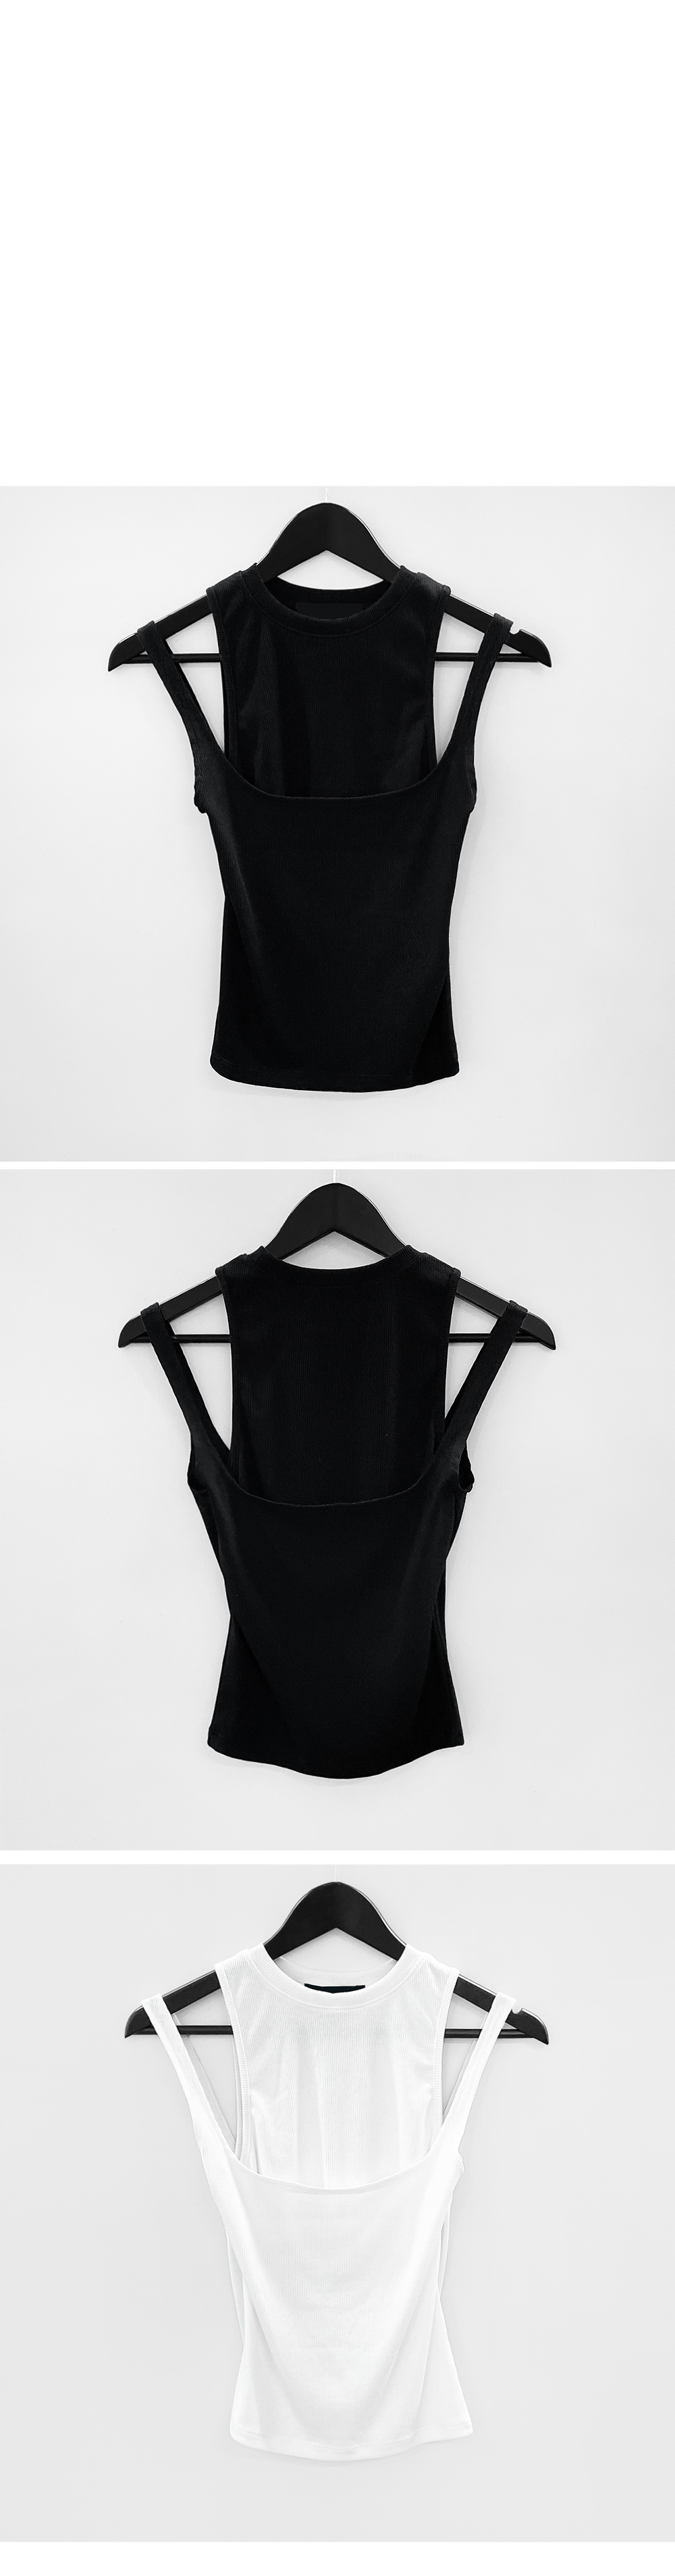 sleeveless charcoal color image-S1L9